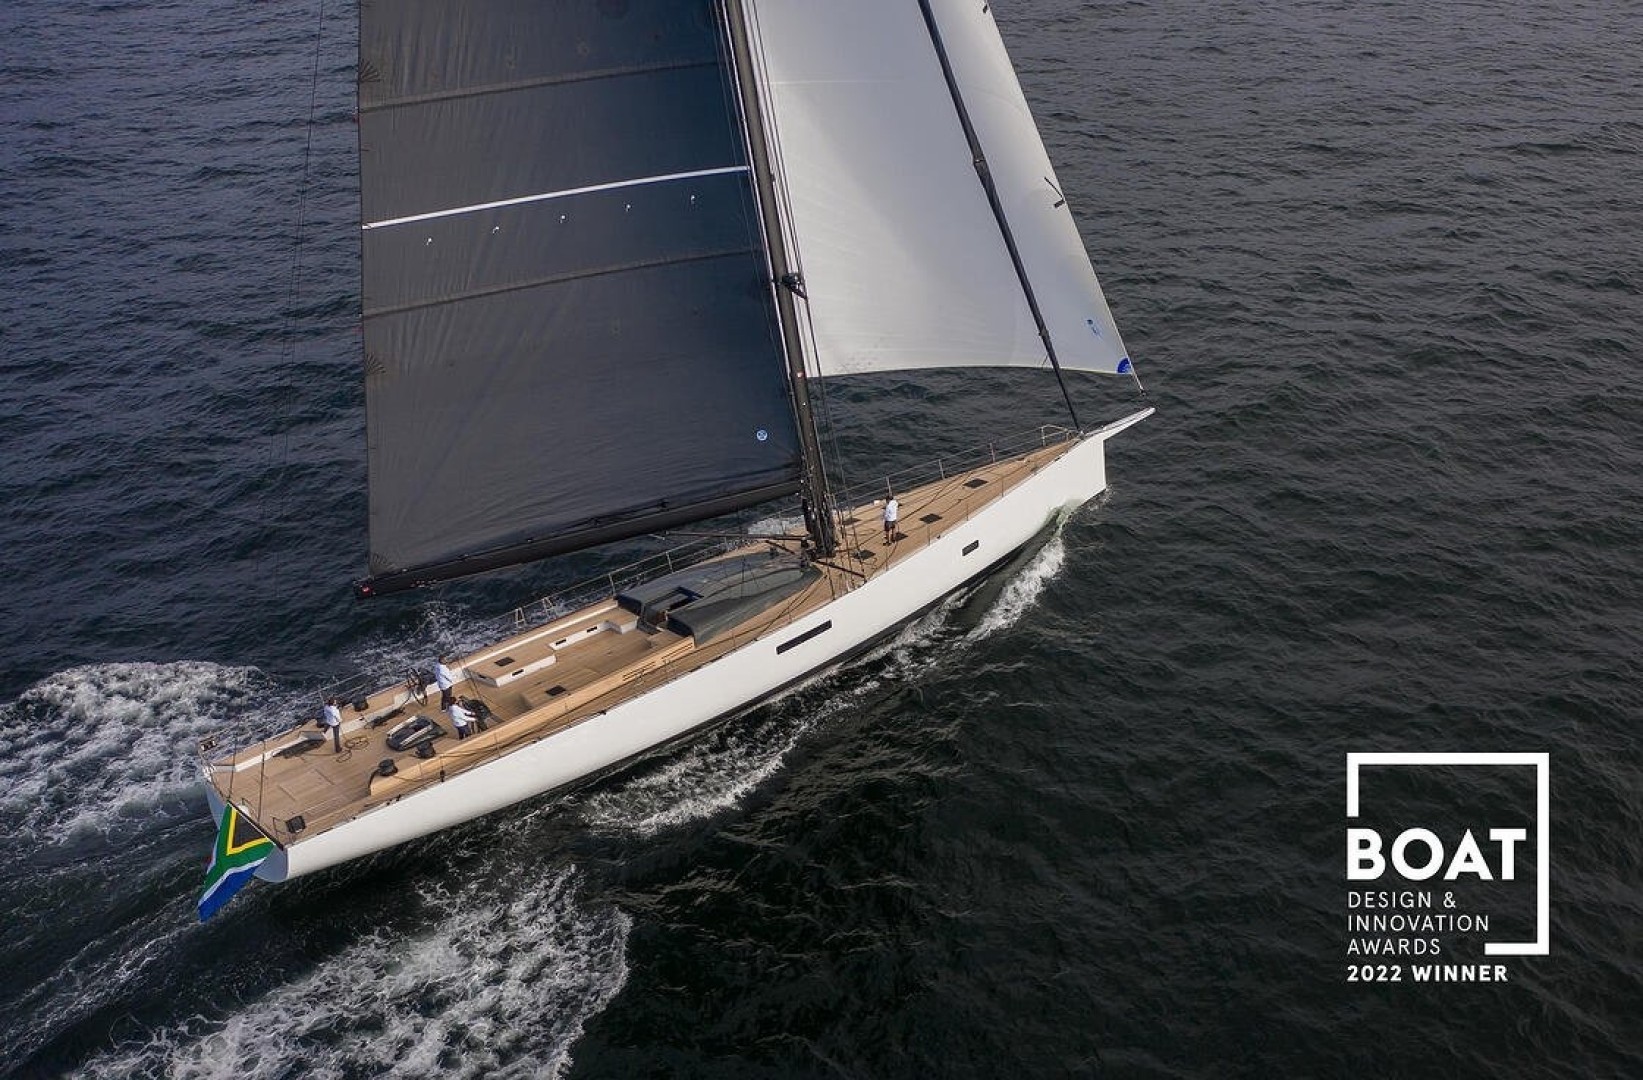 SW105 Taniwha winner of the Boat International Design and Innovation Award